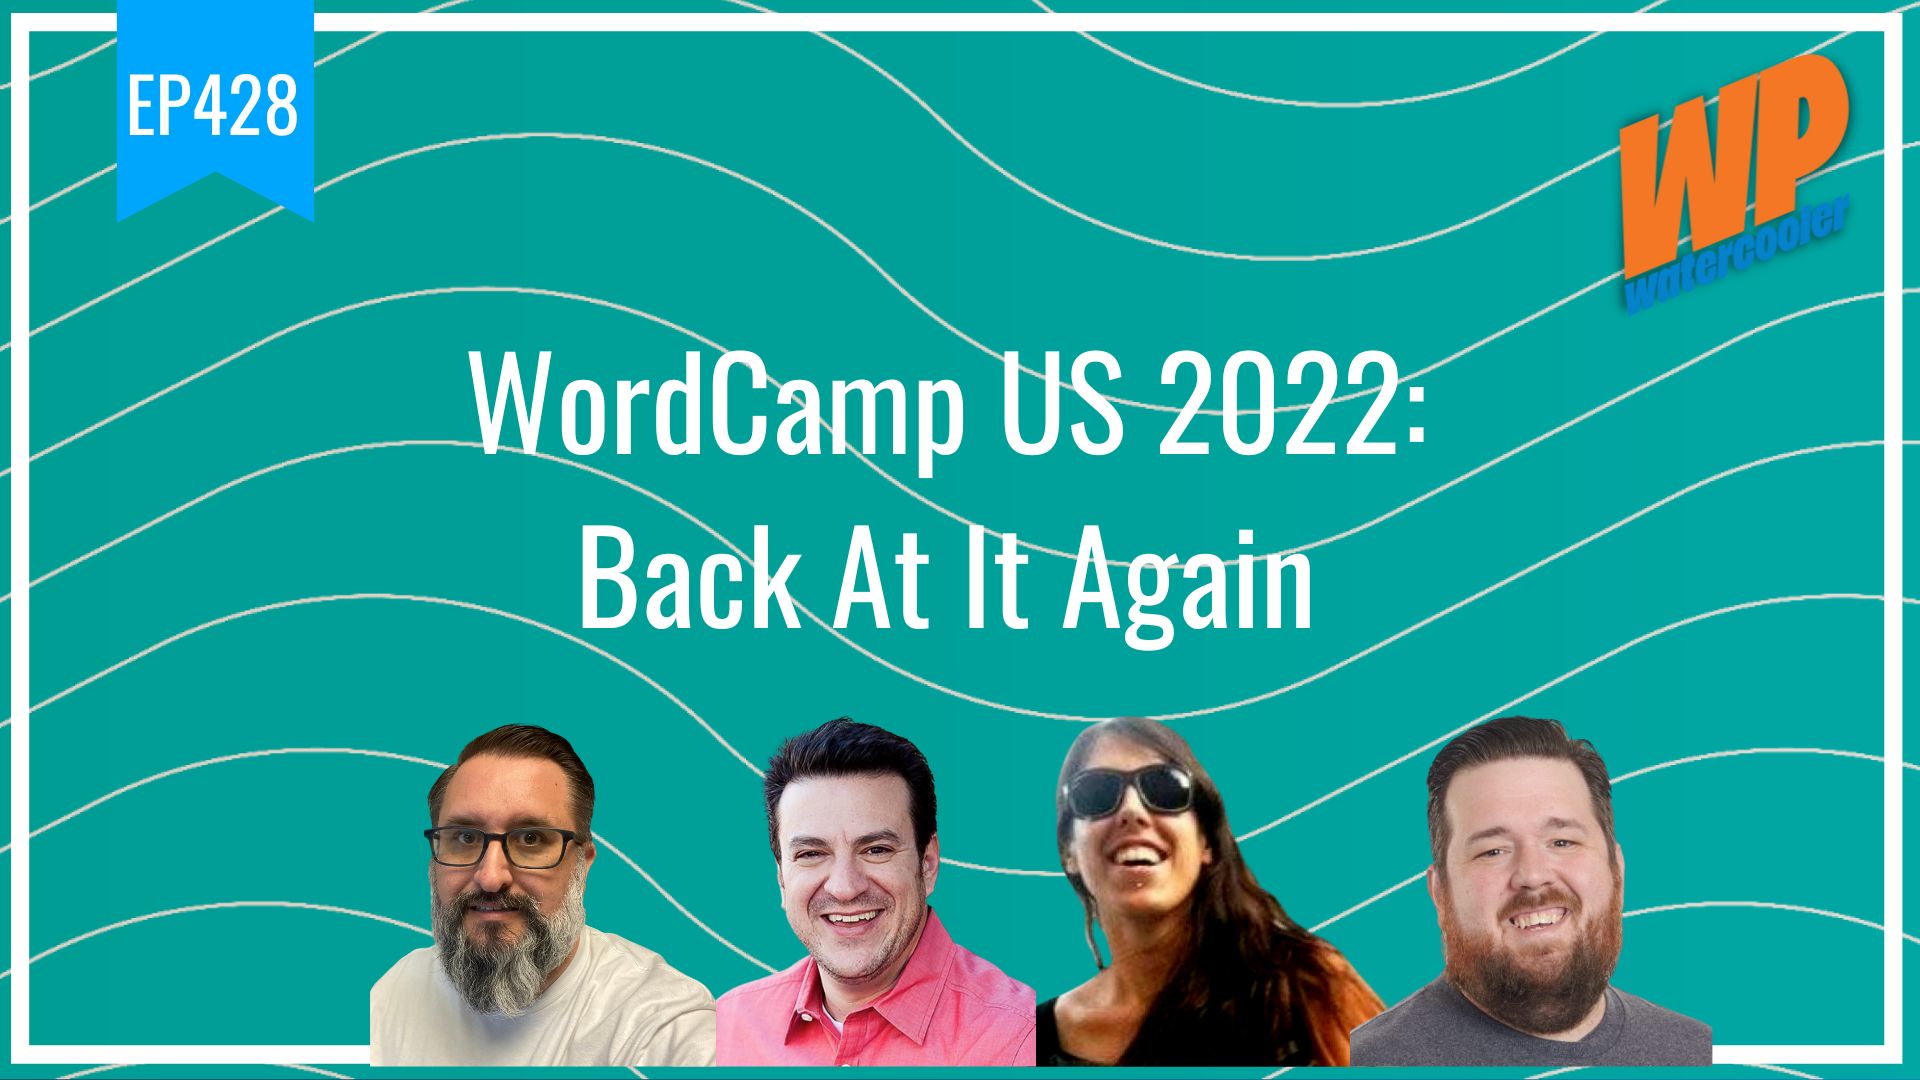 EP428 – WordCamp US 2022: Back At It Again